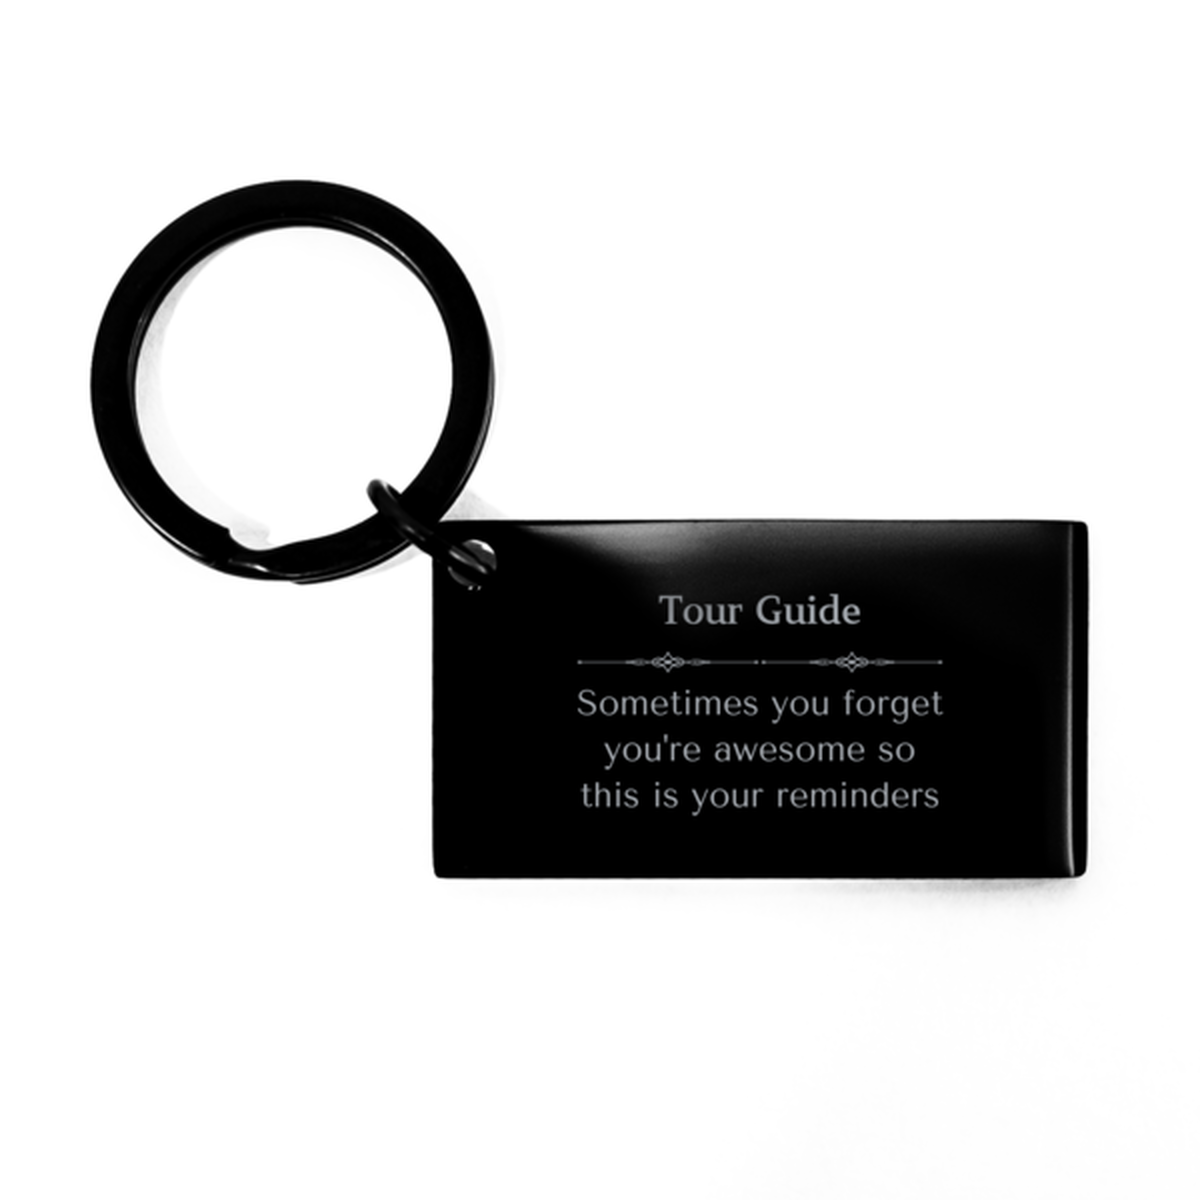 Sentimental Tour Guide Keychain, Trucker Sometimes you forget you're awesome so this is your reminders, Graduation Christmas Birthday Gifts for Tour Guide, Men, Women, Coworkers